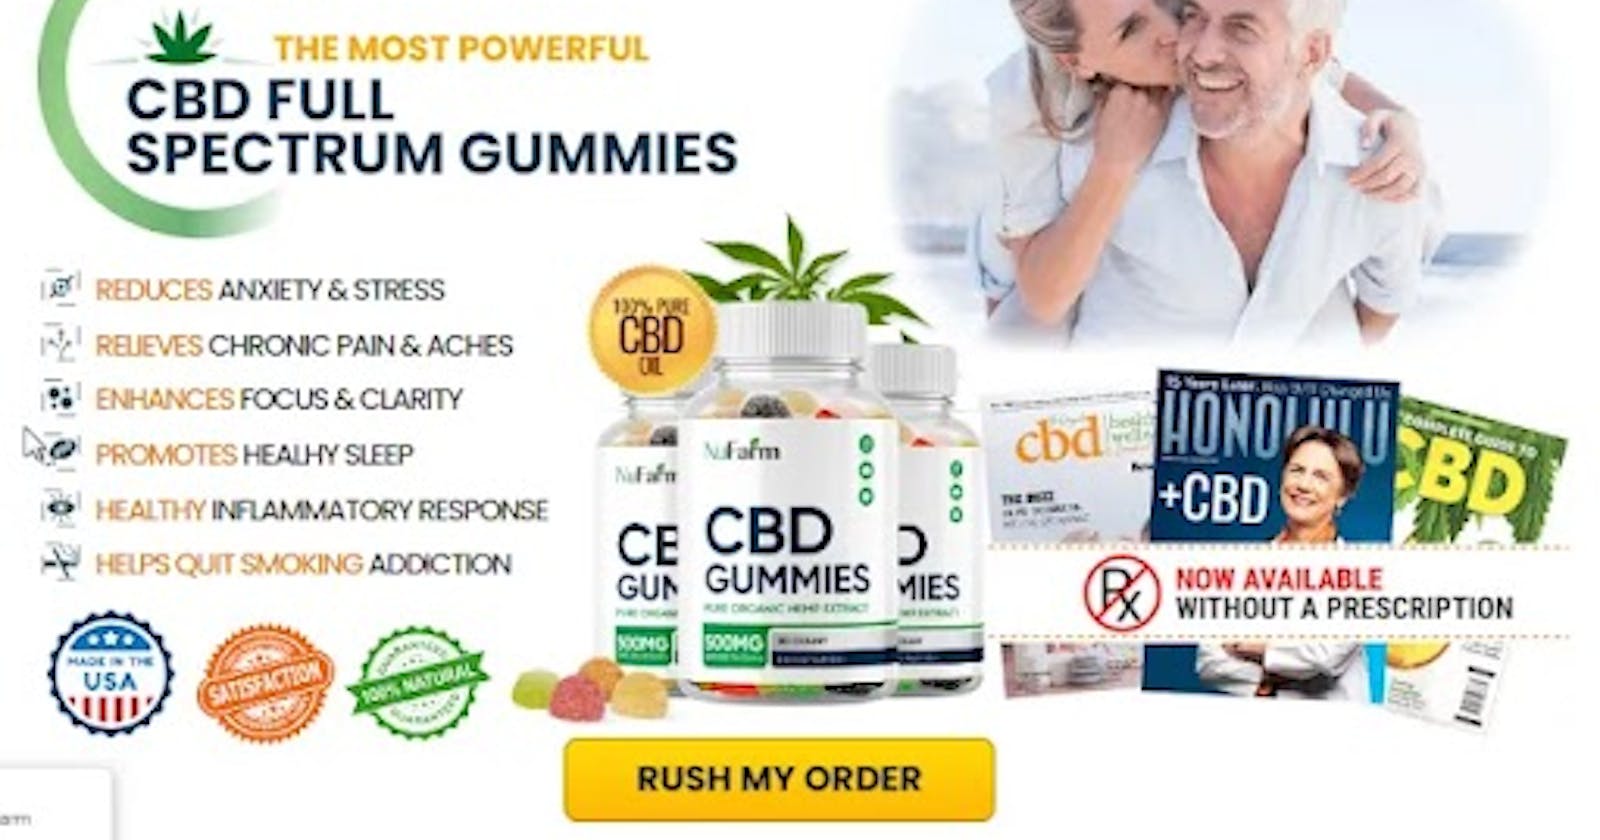 Nufarm Cbd Gummies Reviews Doesn't Have To Be Hard. Read These 10 Tips